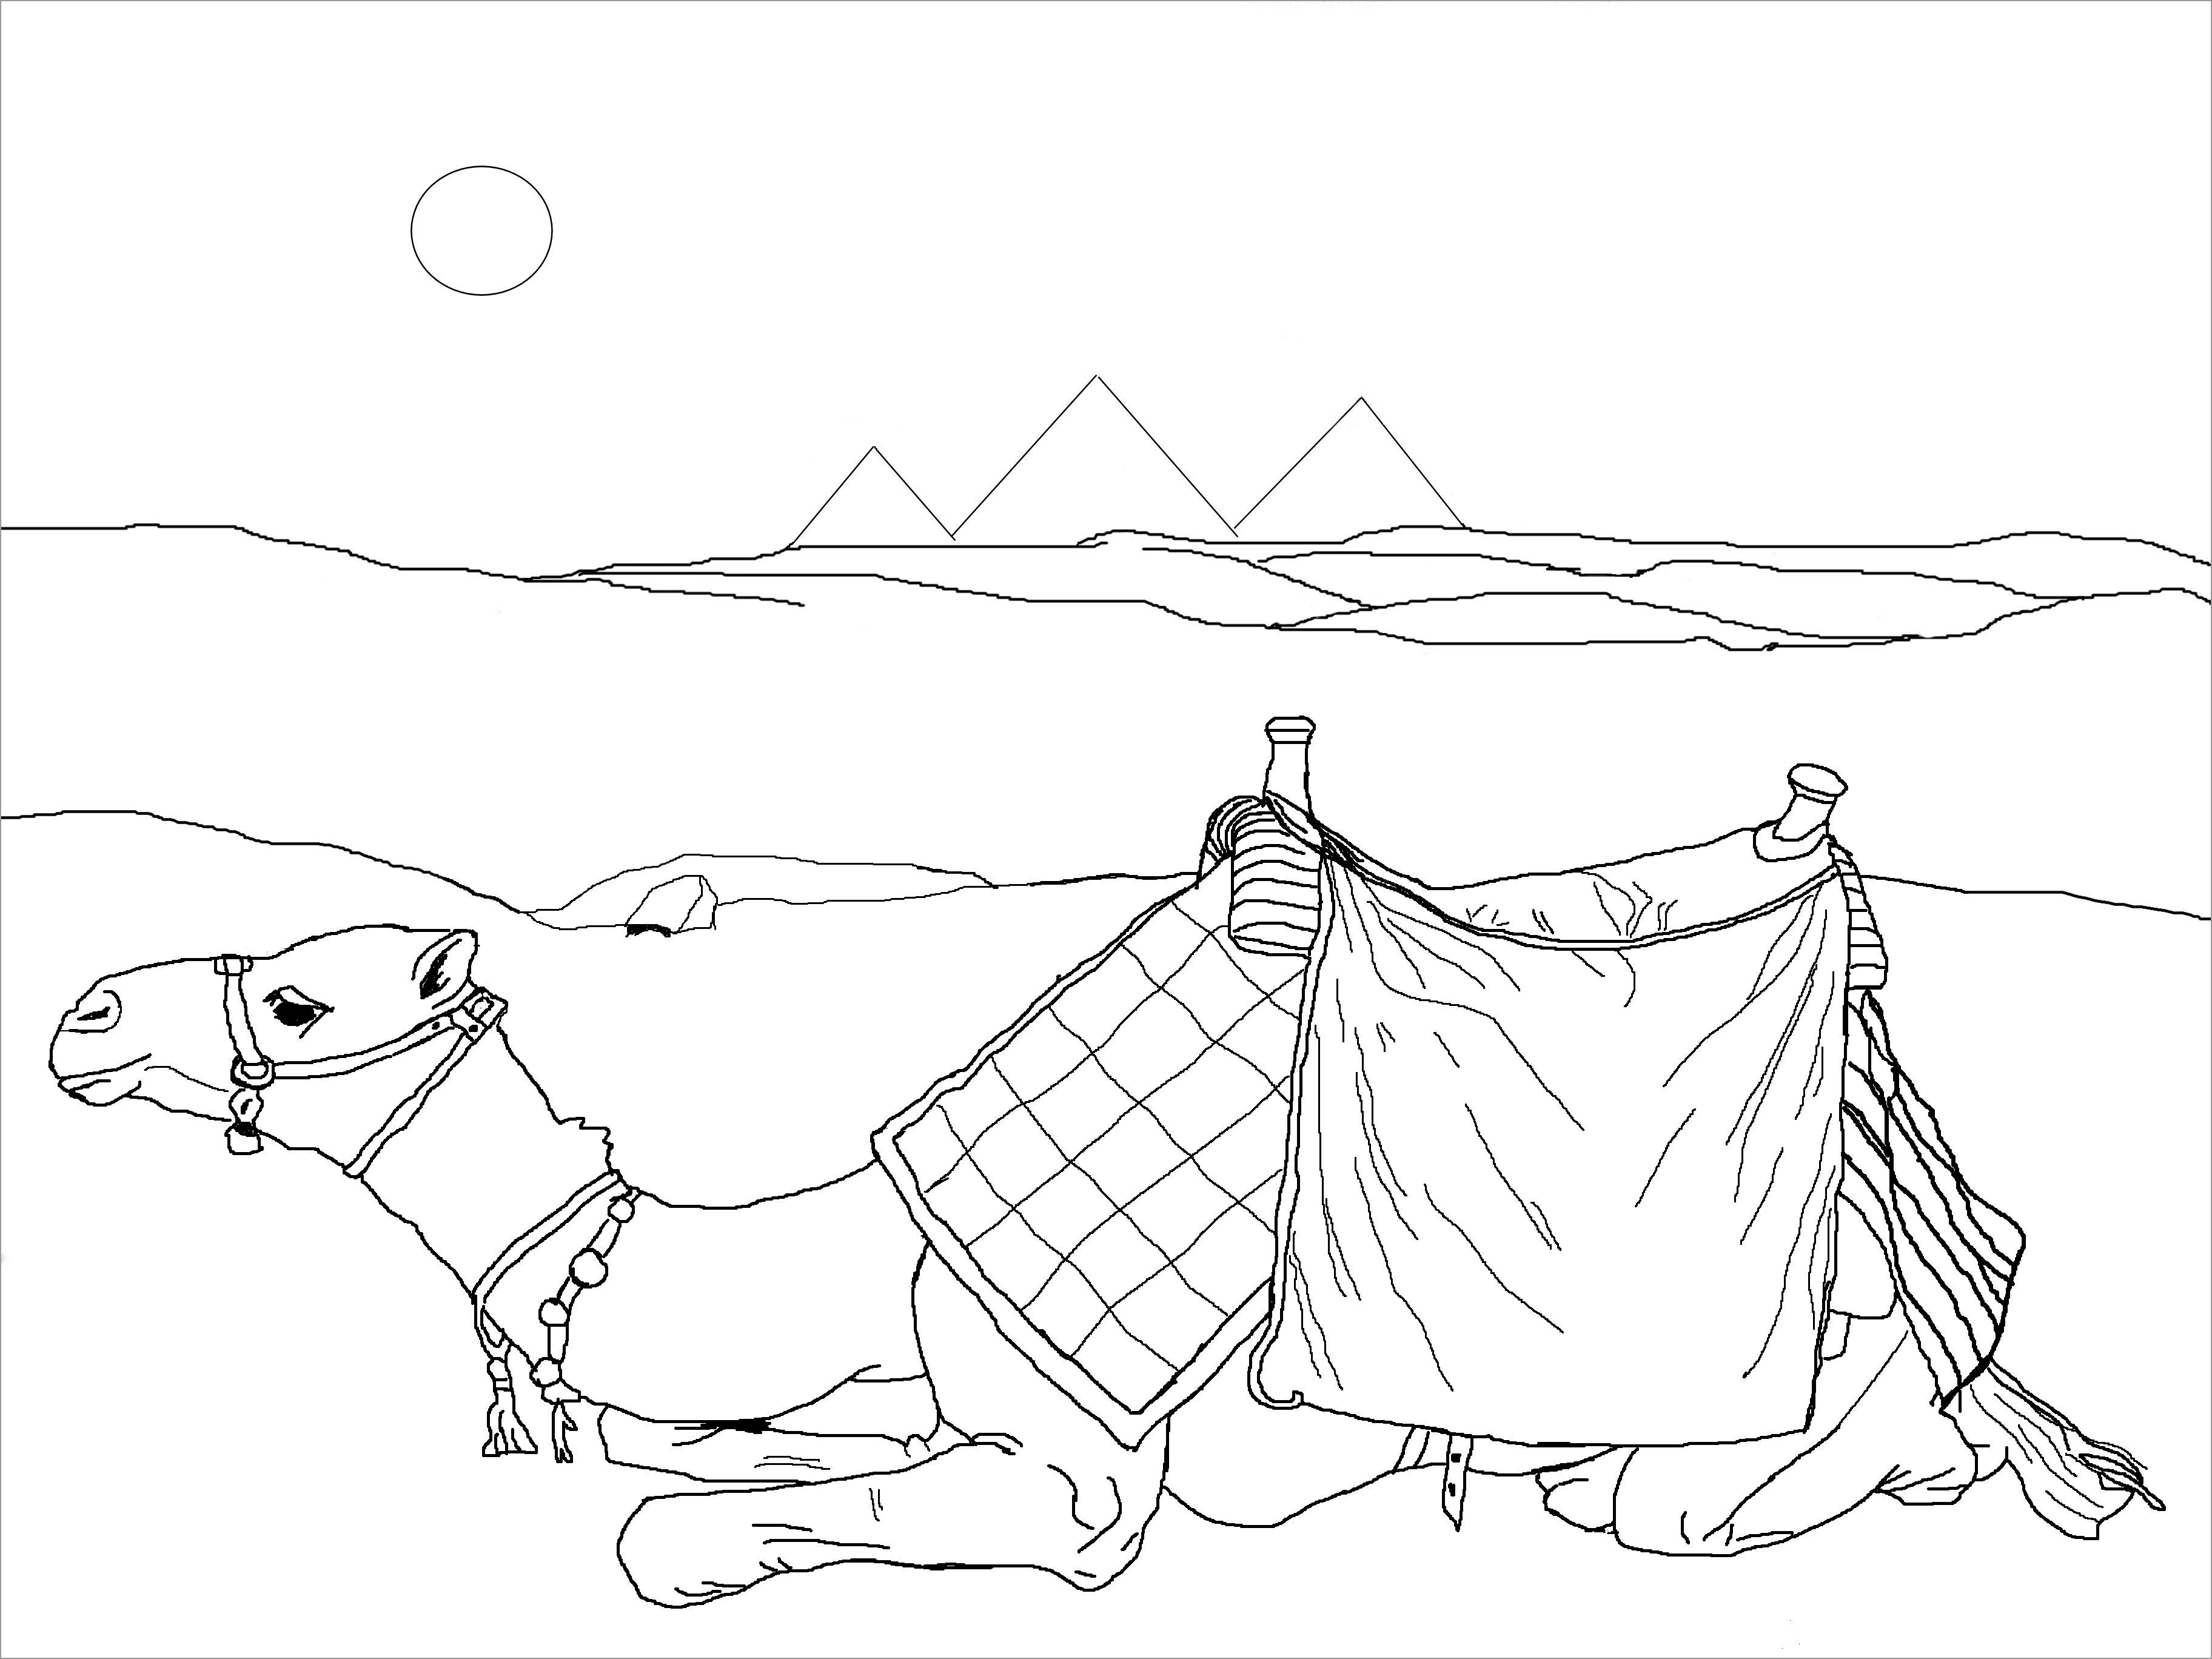 Desert Animal Camel Coloring Page for Adult